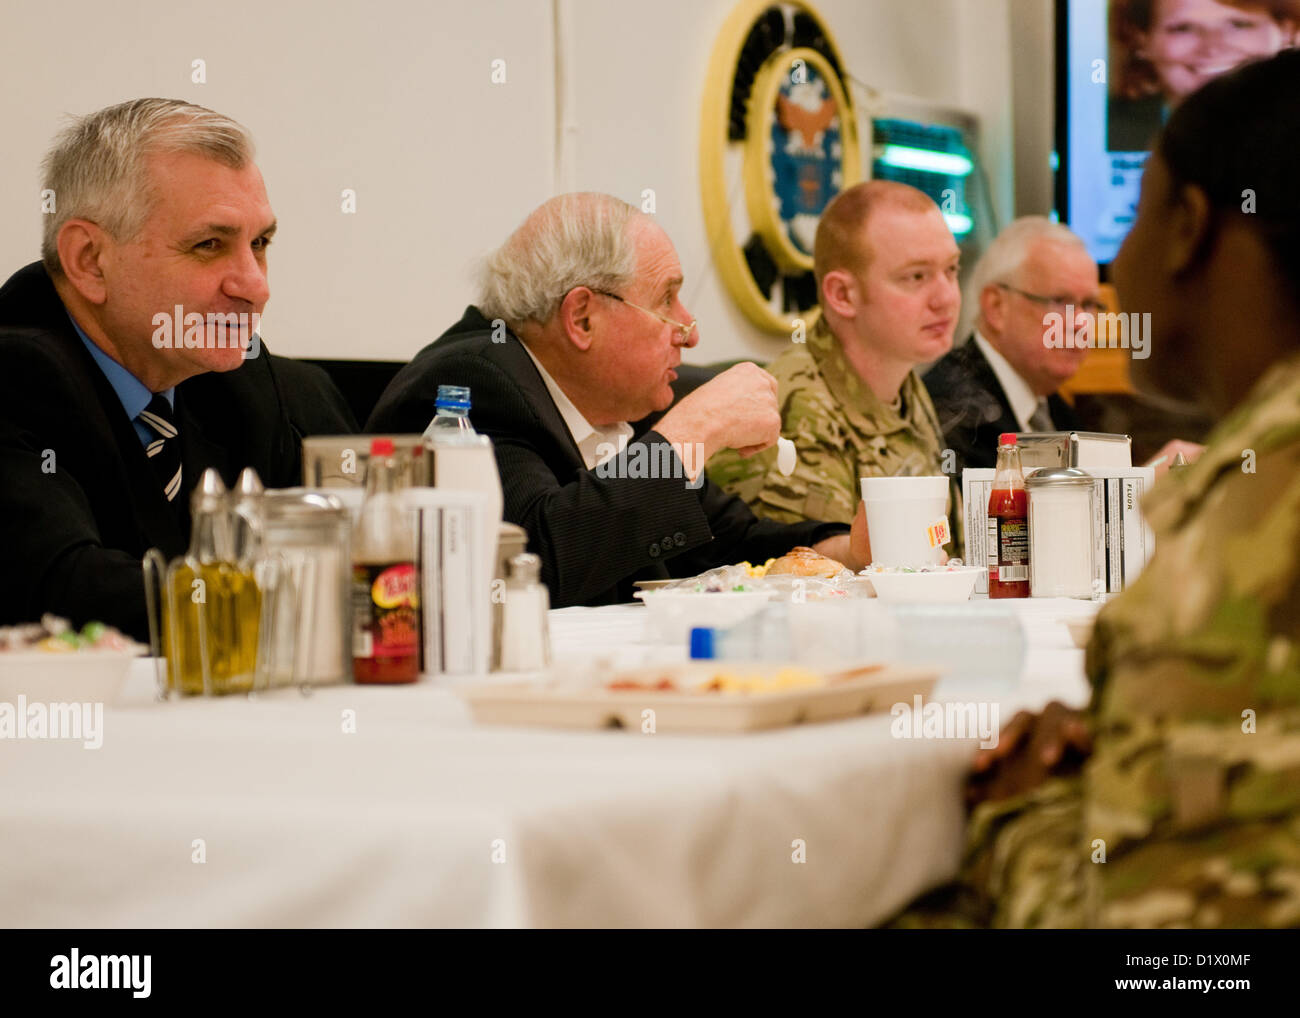 BAGRAM AIRFIELD, Afghanistan – U.S. Senator Jack Reed (left), senior senator for the state of Rhode Island, shares a meal with U.S. Soldiers attached to Combined Joint Task-1, 1st Infantry Division, during a constituent breakfast at Bagram Airfield, Afghanistan, Jan. 7, 2013. Reed and U.S. Senator Carl Levin (right), state senator for Michigan, visited troops from their respective states to boost morale and discuss U.S. efforts in Afghanistan. (U.S. Army photo by Sgt. Christopher Bonebrake, 115th Mobile Public Affairs Detachment) Stock Photo